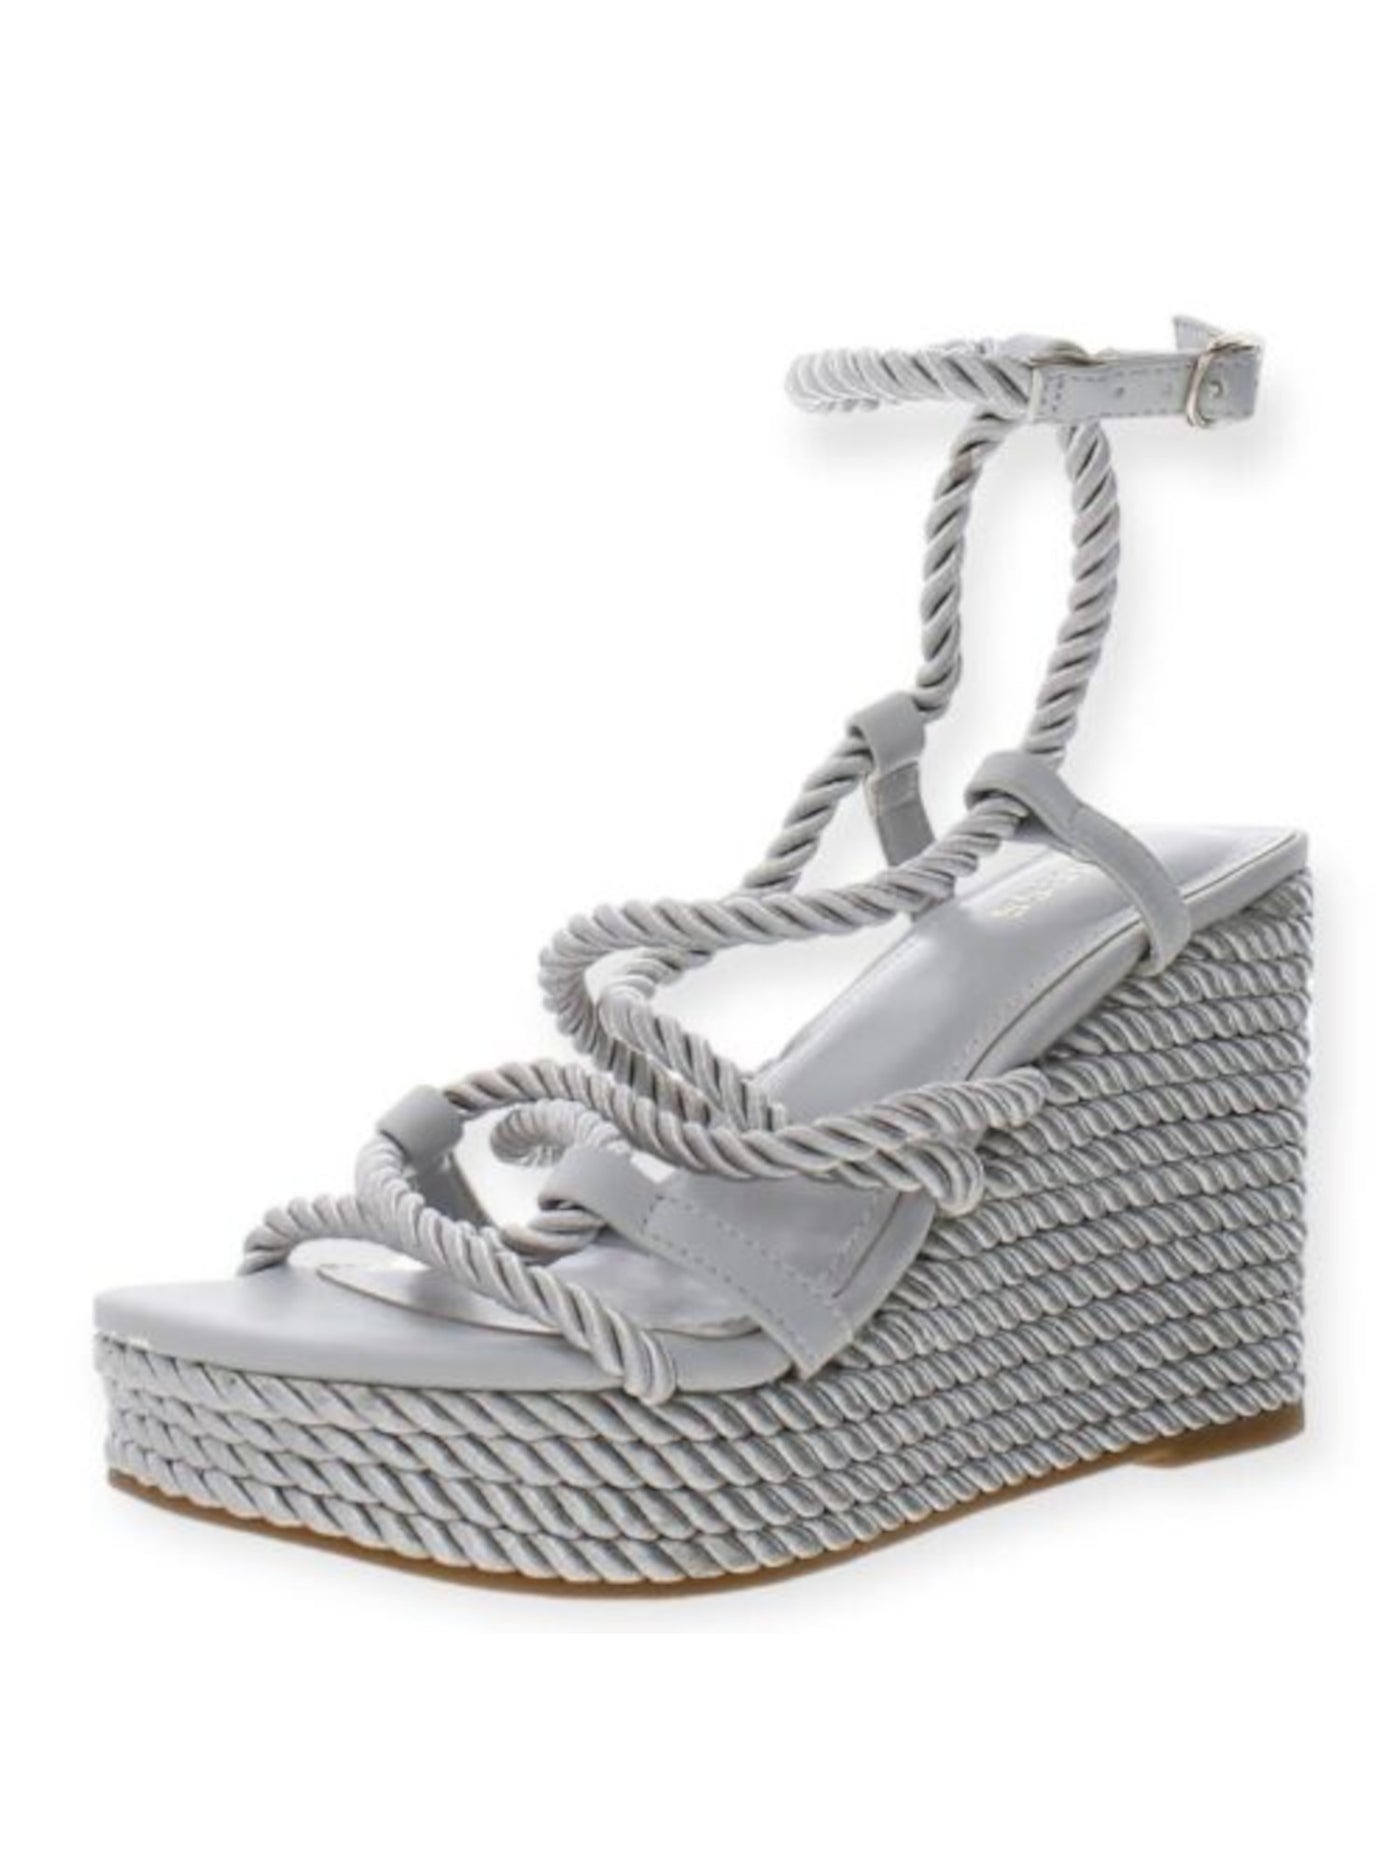 GUESS Womens Gray Textured Rope Wrapped 1" Platform Padded Adjustable Ankle Strap Natesha Round Toe Wedge Buckle Heeled Sandal 9.5 M